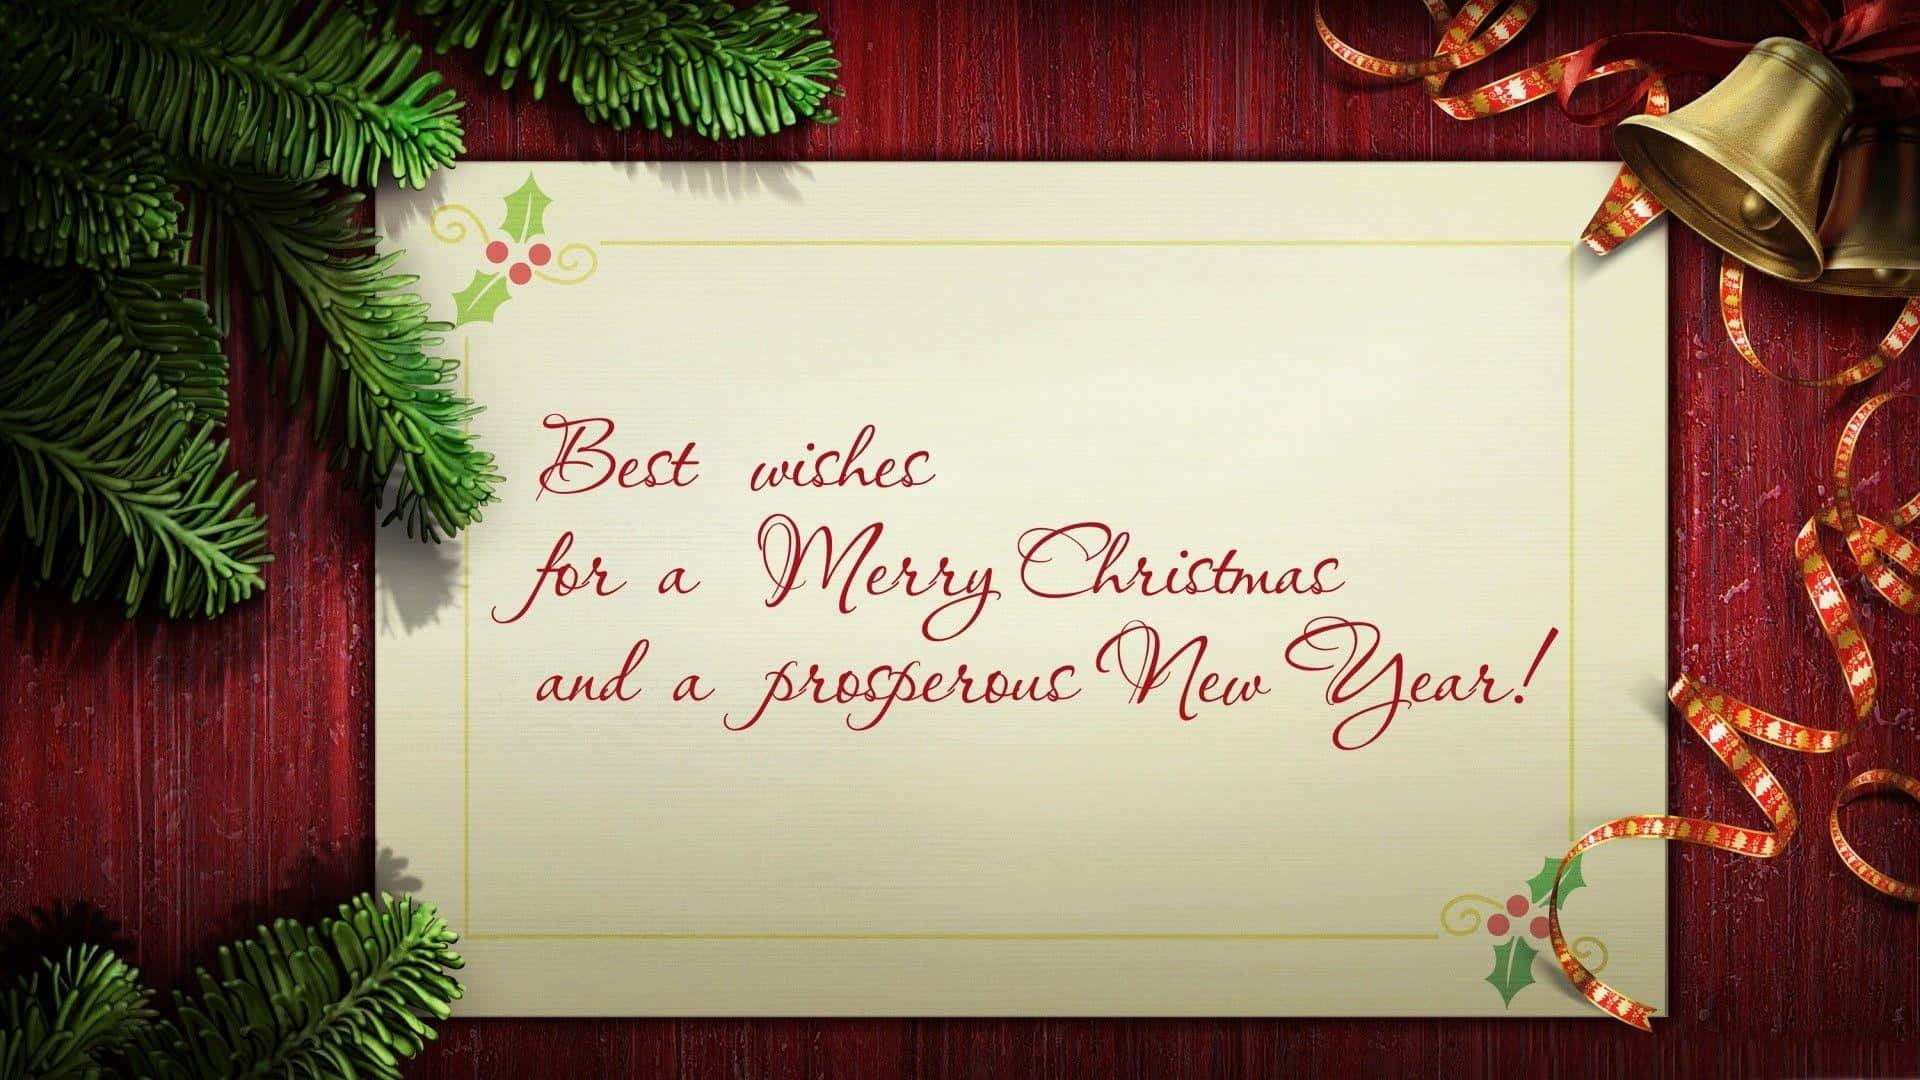 Show Your Holiday Joy with the Perfect Christmas Card